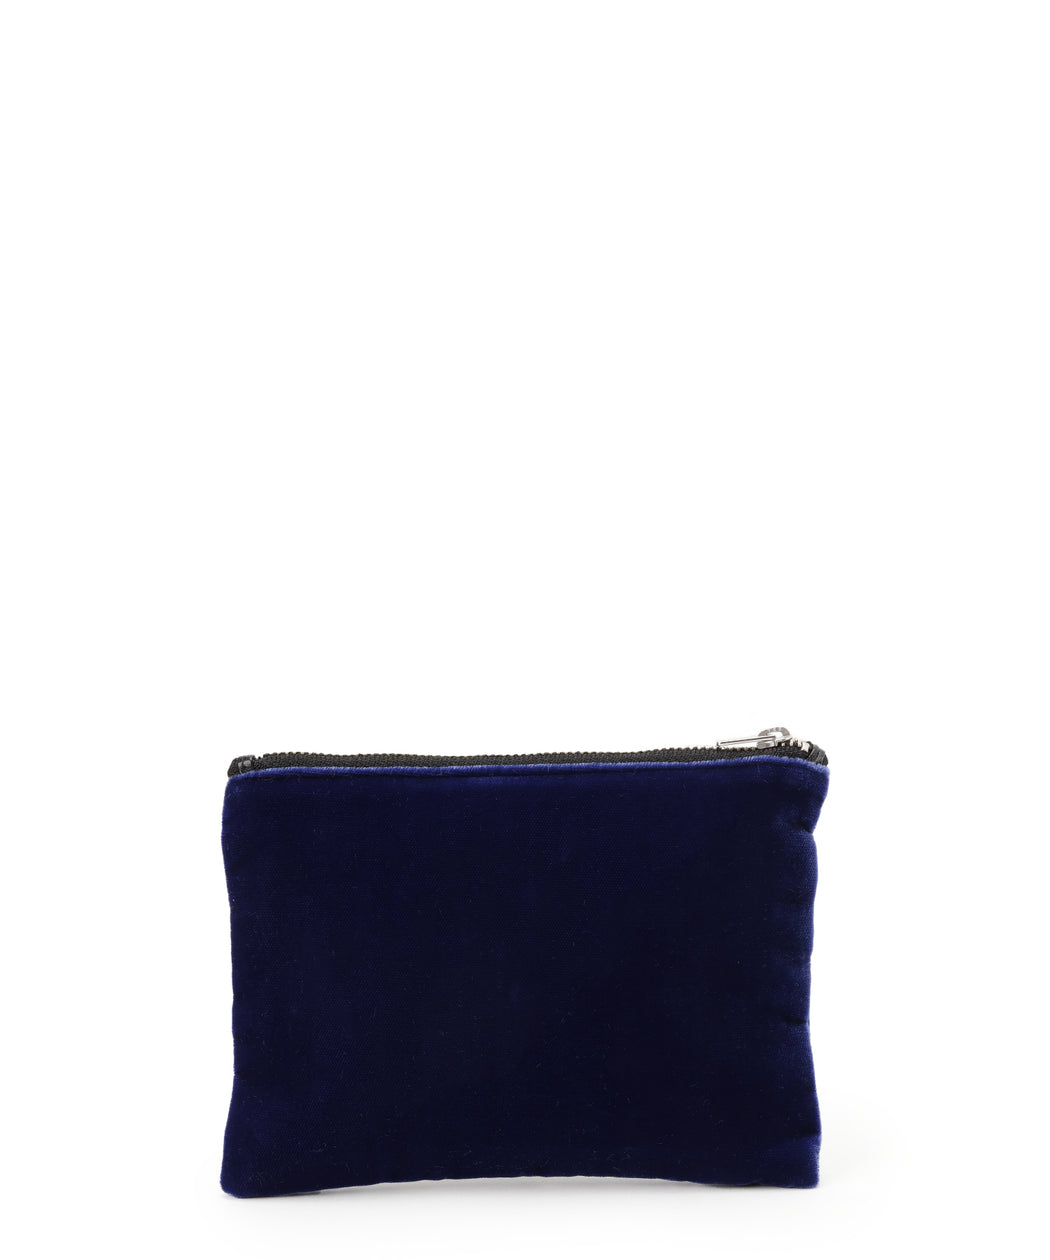 24S-Pouch 004